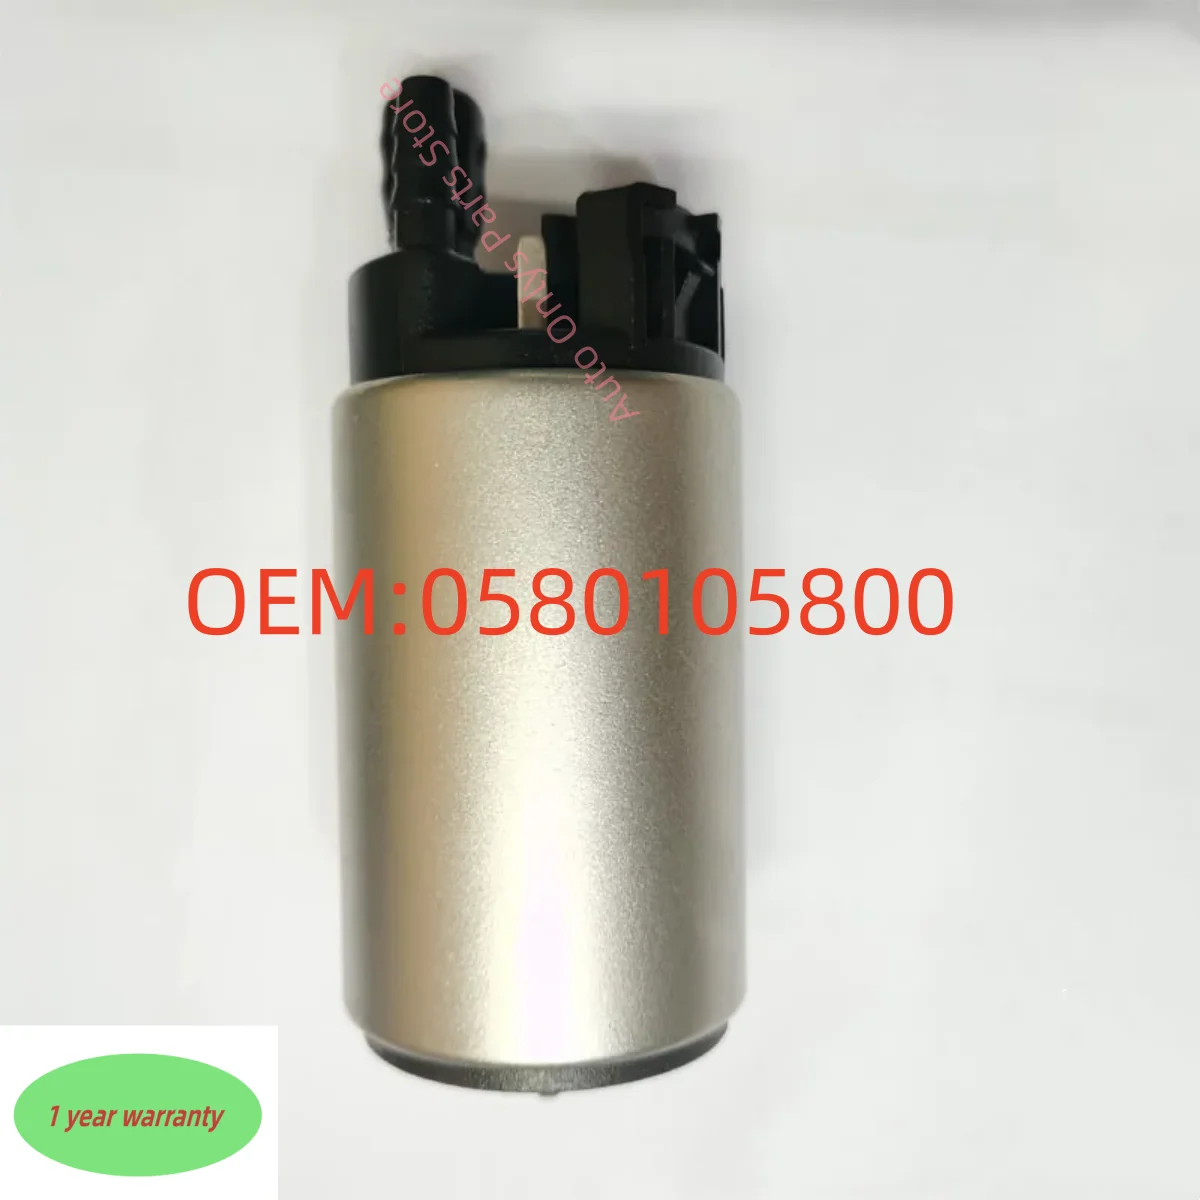 

4pc 0580105800 New 2 holes Fuel Pump With Strainer High quality For Bmw 320i Fuel Pump Refill 0580105800 car accessories